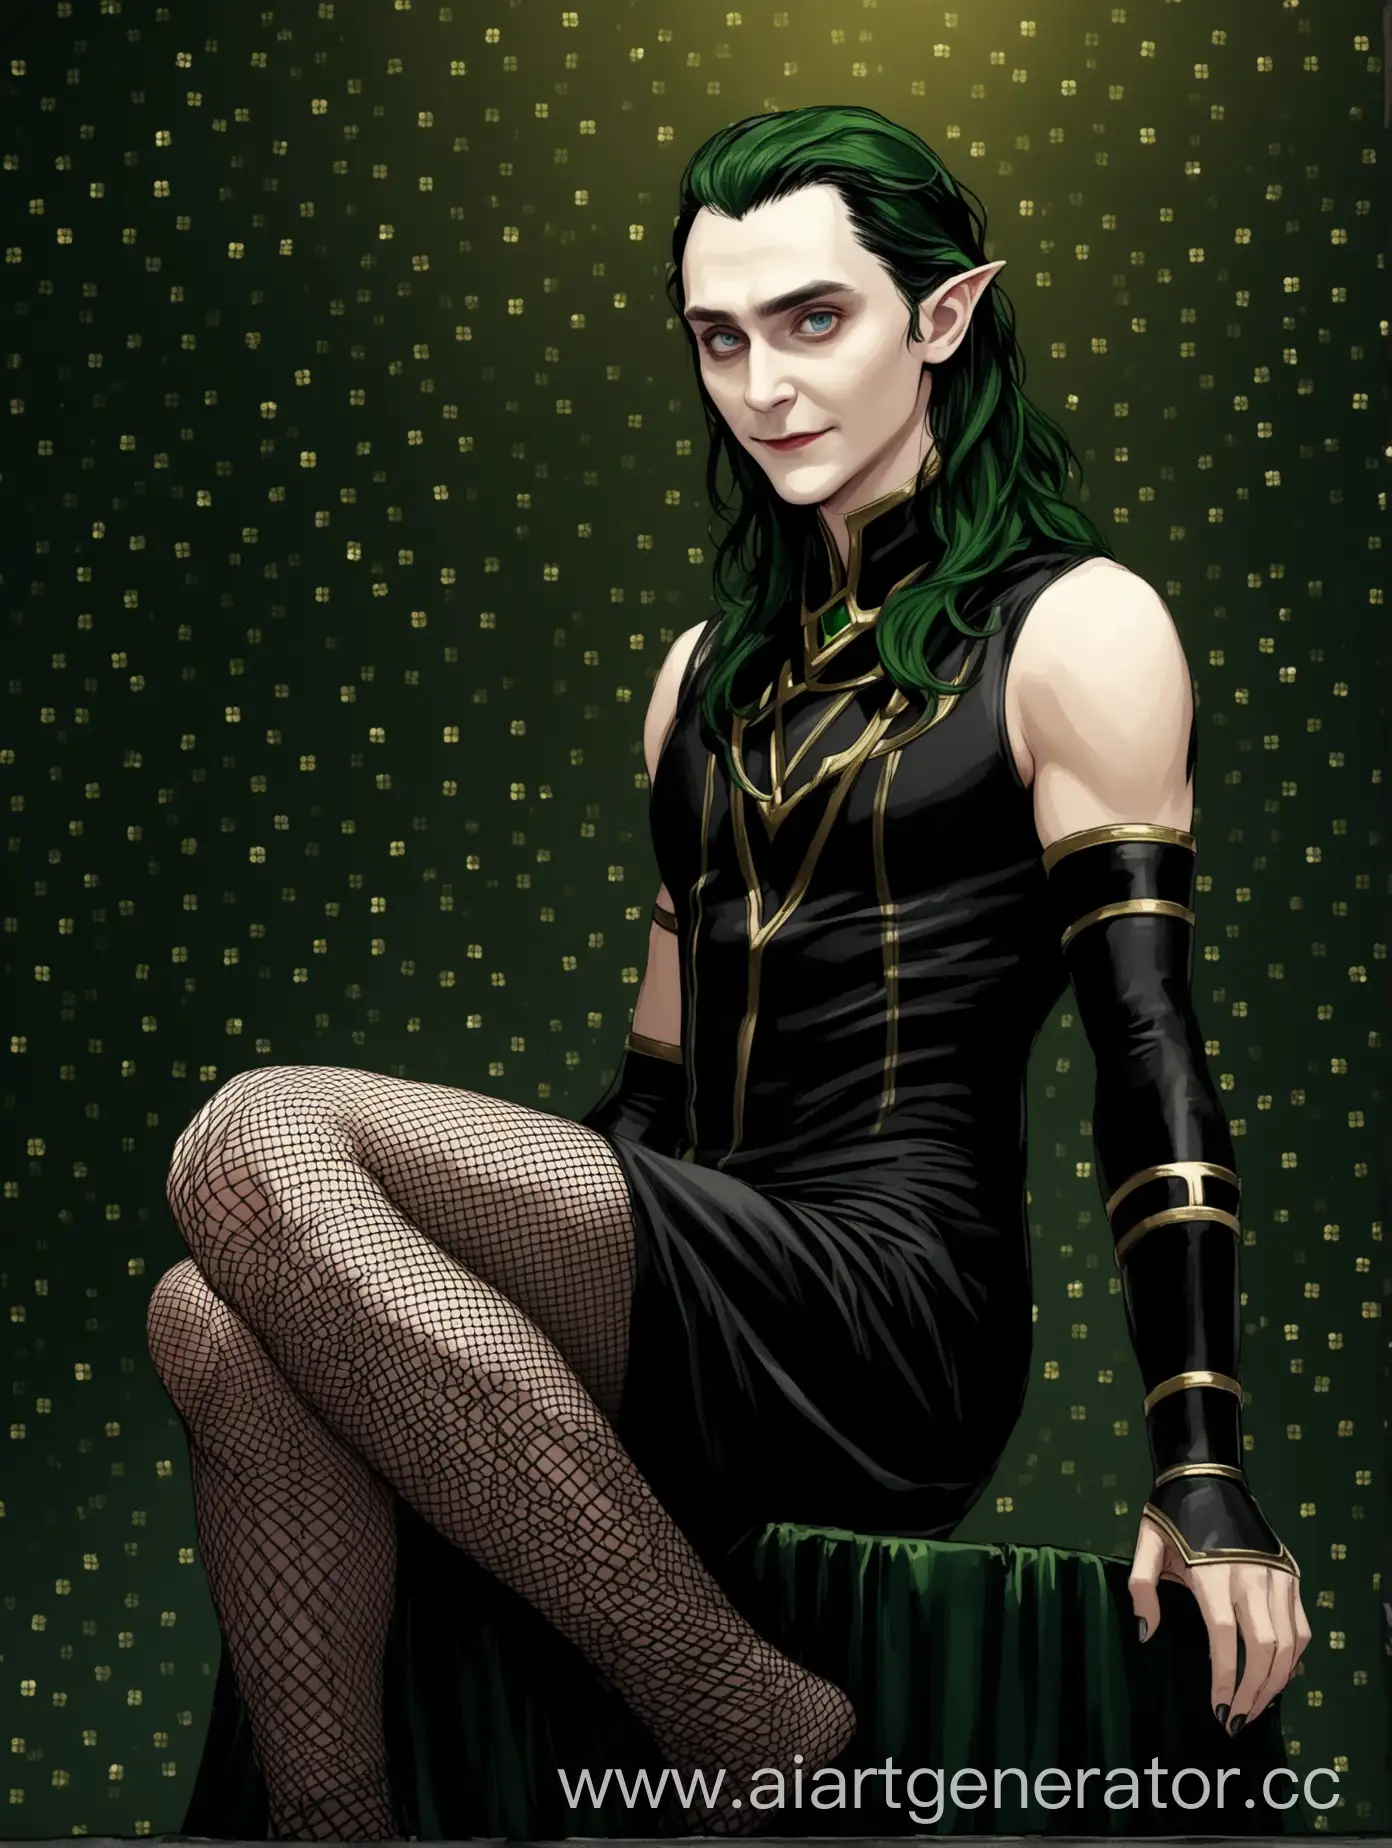 Loki in a black dress with fishnet tights